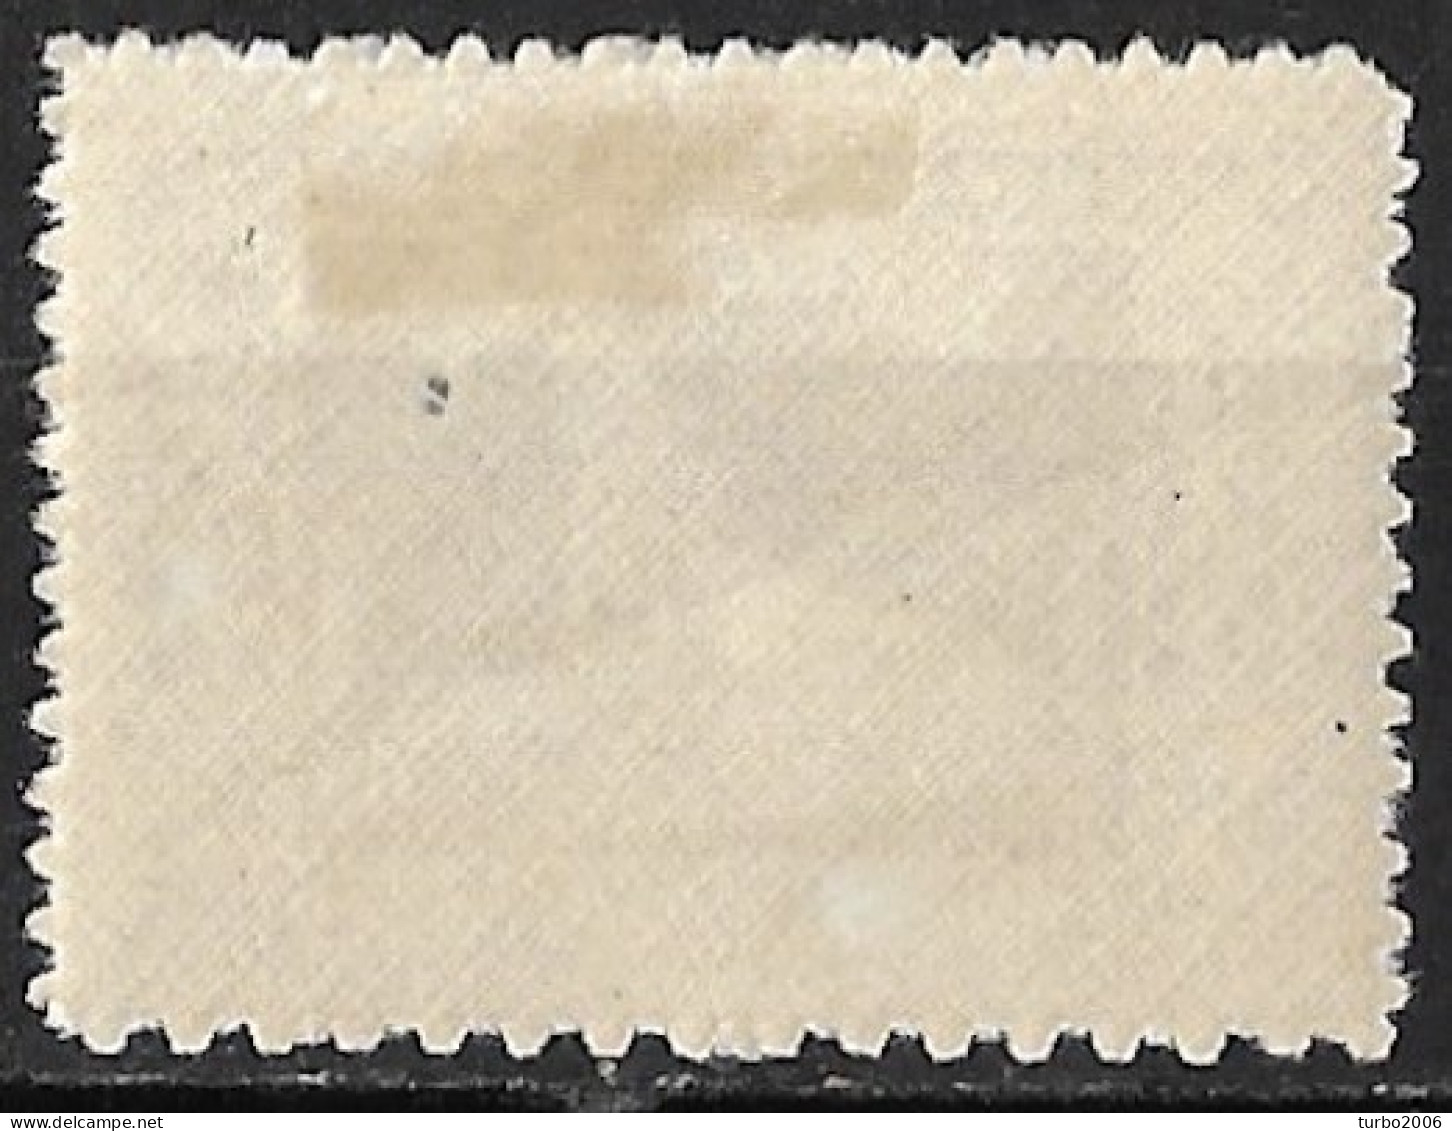 GREECE 1926 Centenary Of The Fall Of Messolongi 25 L Violet Perforation 3 X 13½  - 10½ On Bottom Vl. 419 B MH - Unused Stamps